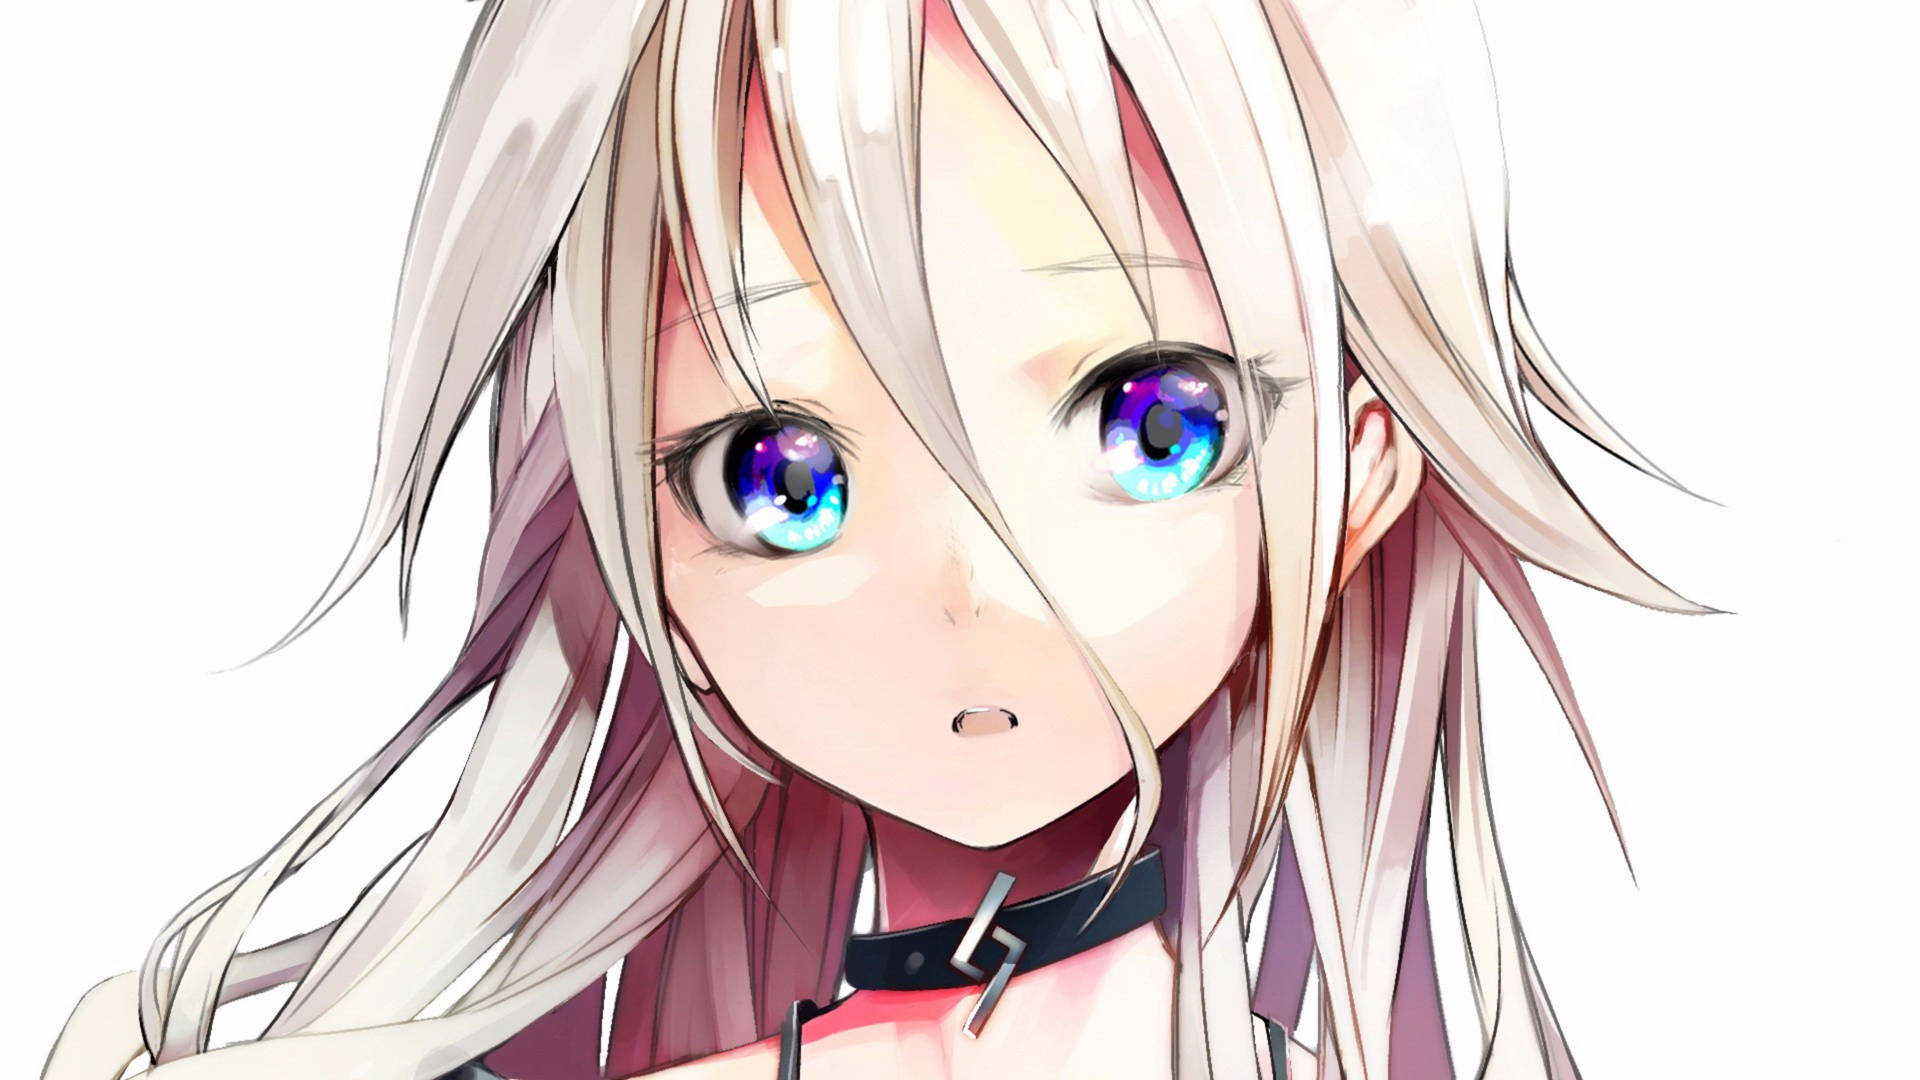 boiling-gnu366: Cute anime girl tennis white hair girl with a blue left eye  and a red right eye. 15 years old. anime